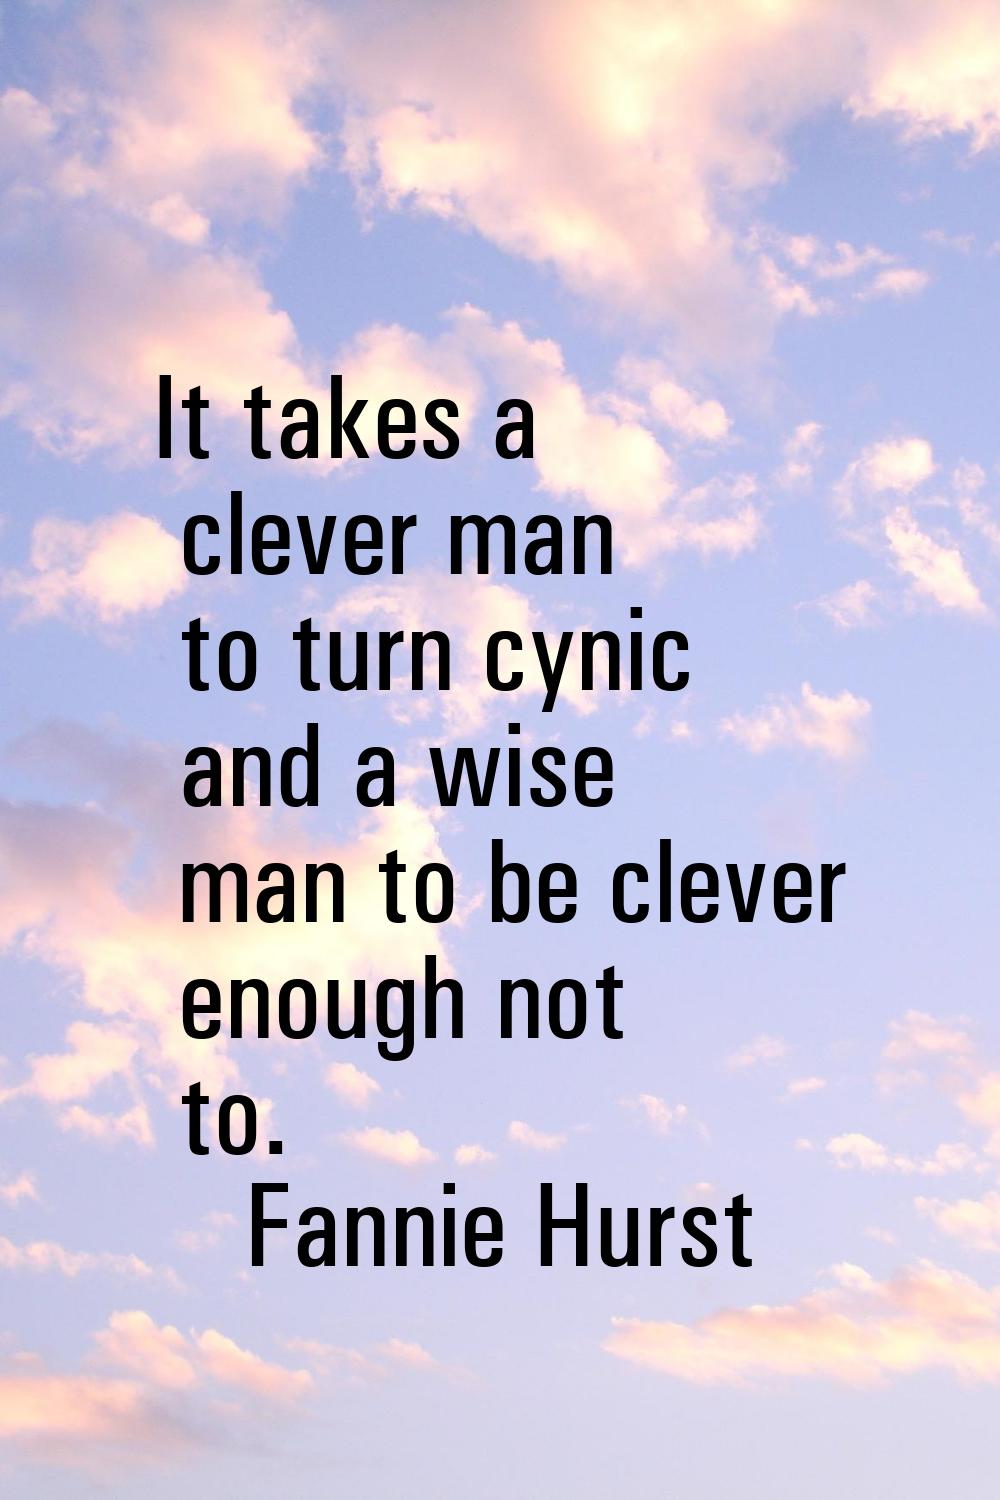 It takes a clever man to turn cynic and a wise man to be clever enough not to.